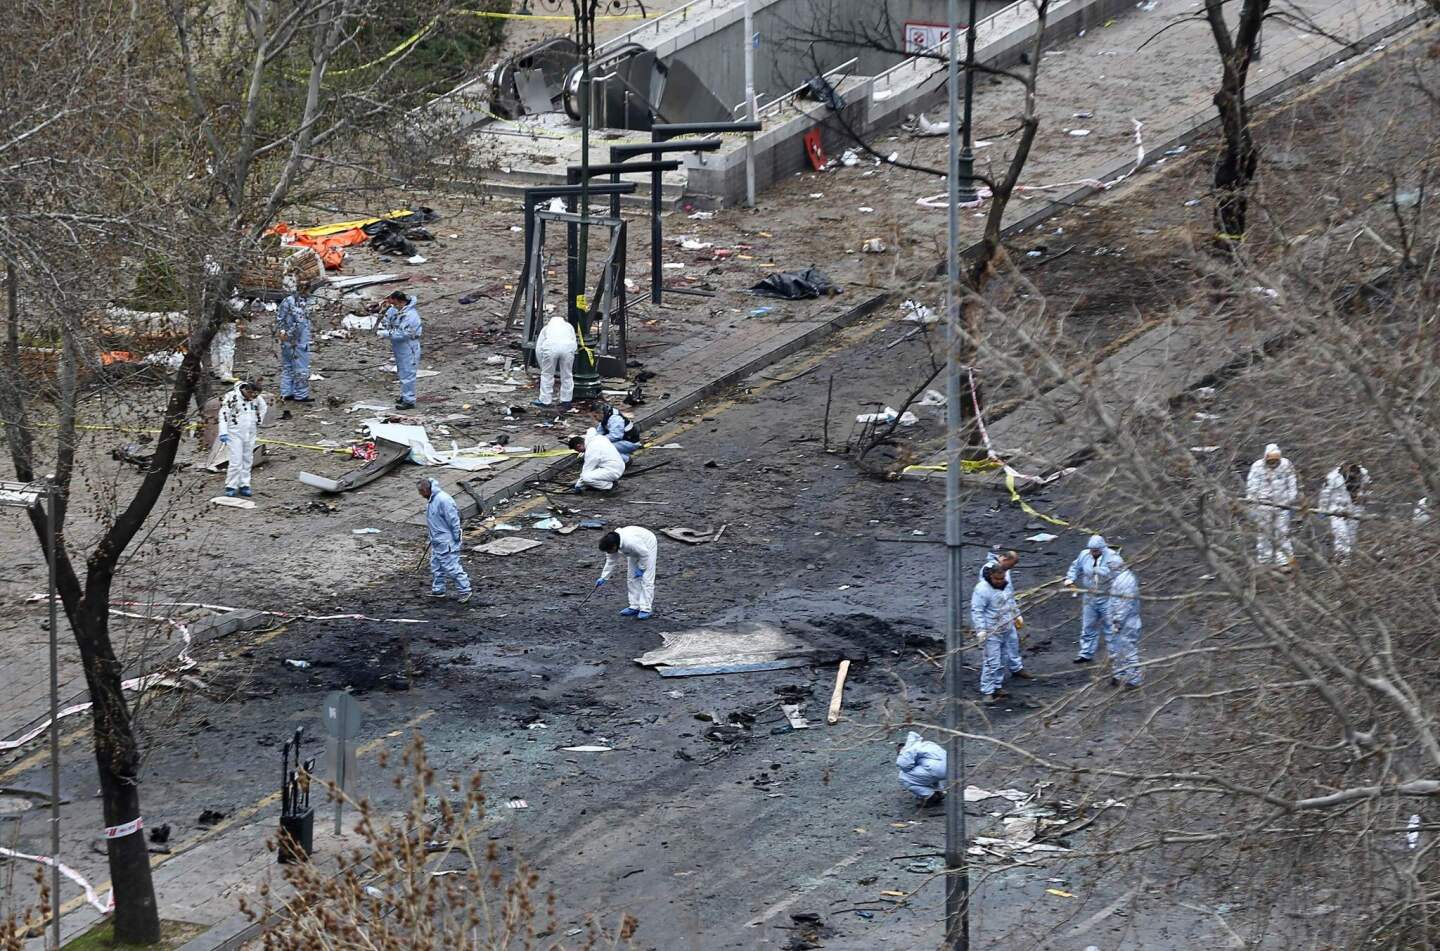 Forensic experts investigate the scene March 14, 2016, the day after a suicide car bomb ripped through a busy square in central Ankara killing at least 37 people and wounding 125, officials said.